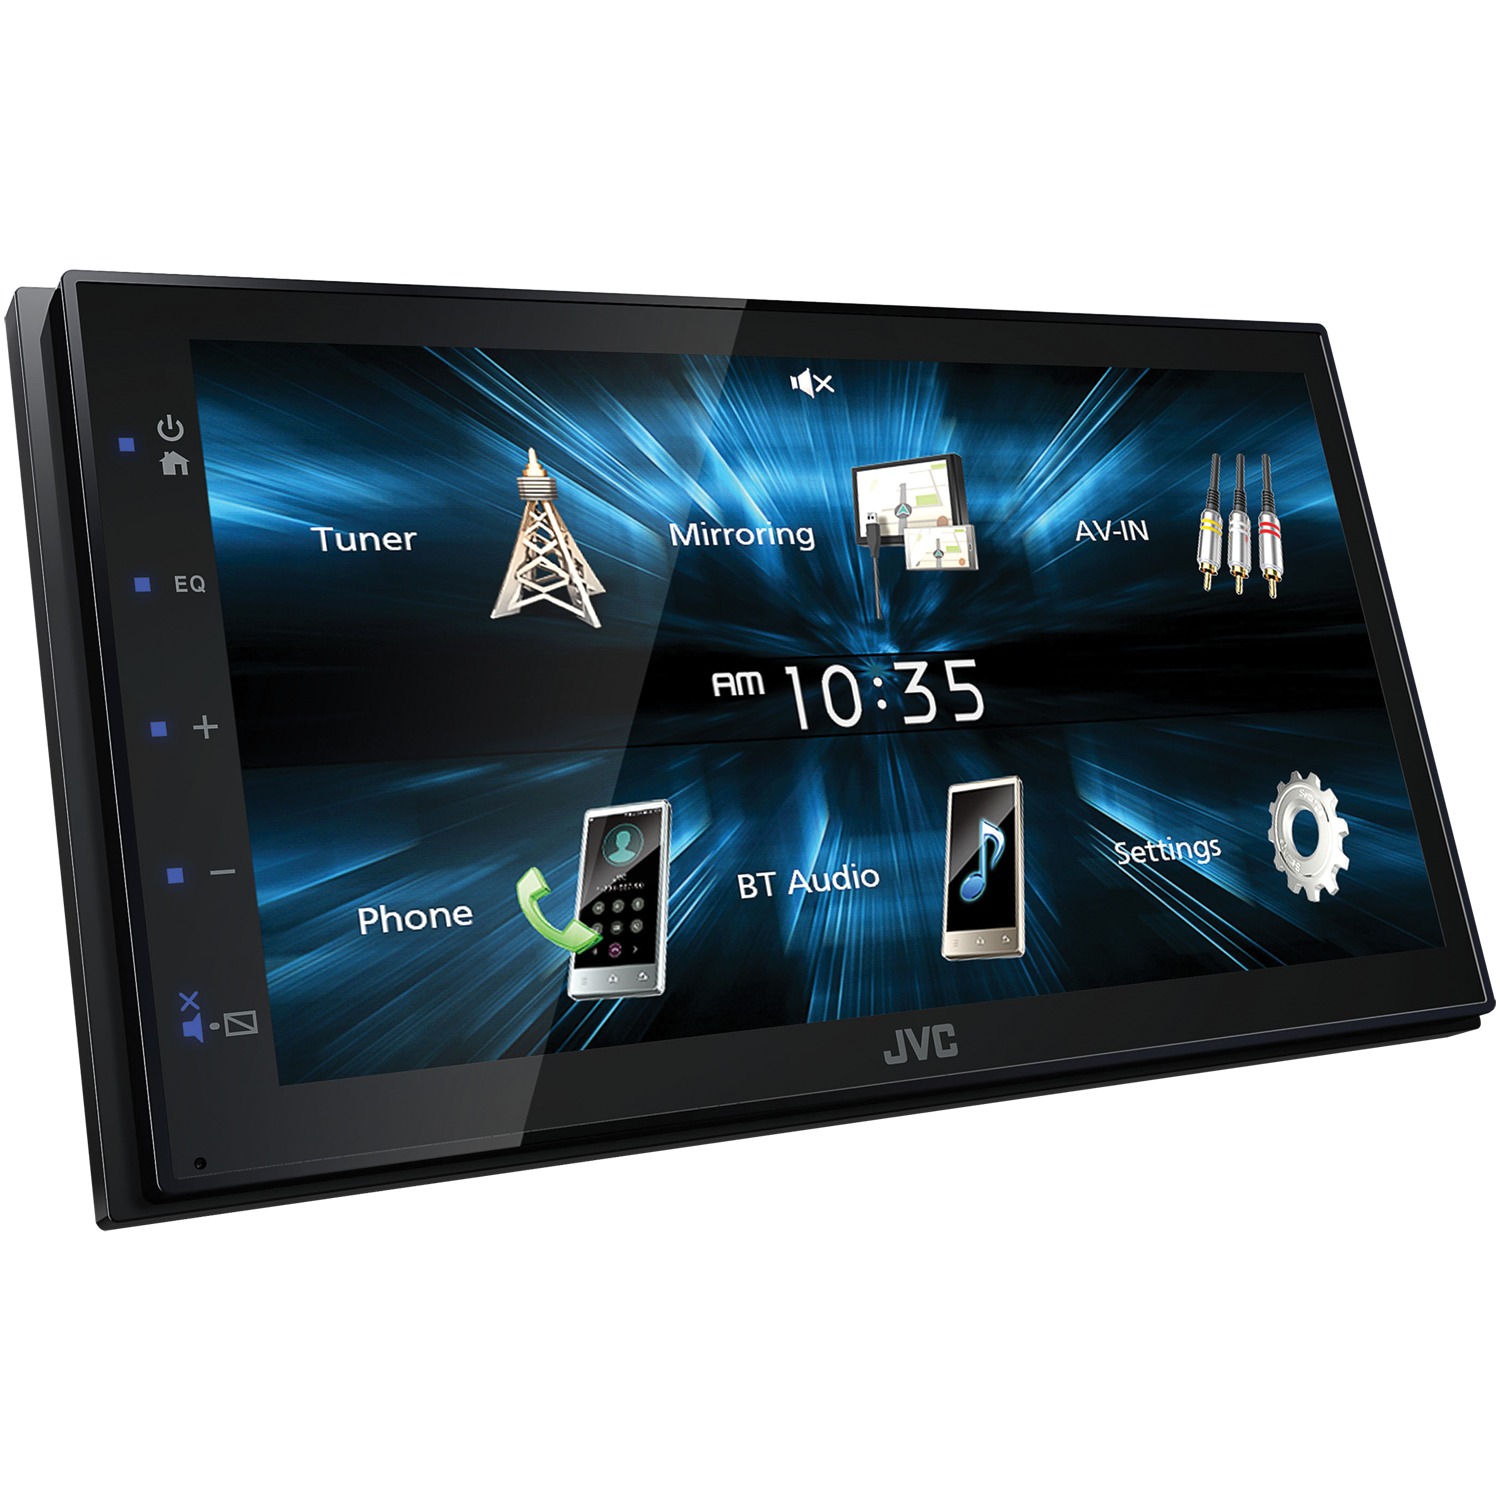 JVC KW-M150BT 6.8-Inch Double DIN In-Dash WVGA Digital Media Receiver, Bluetooth and USB Mirroring for Android - image 3 of 3